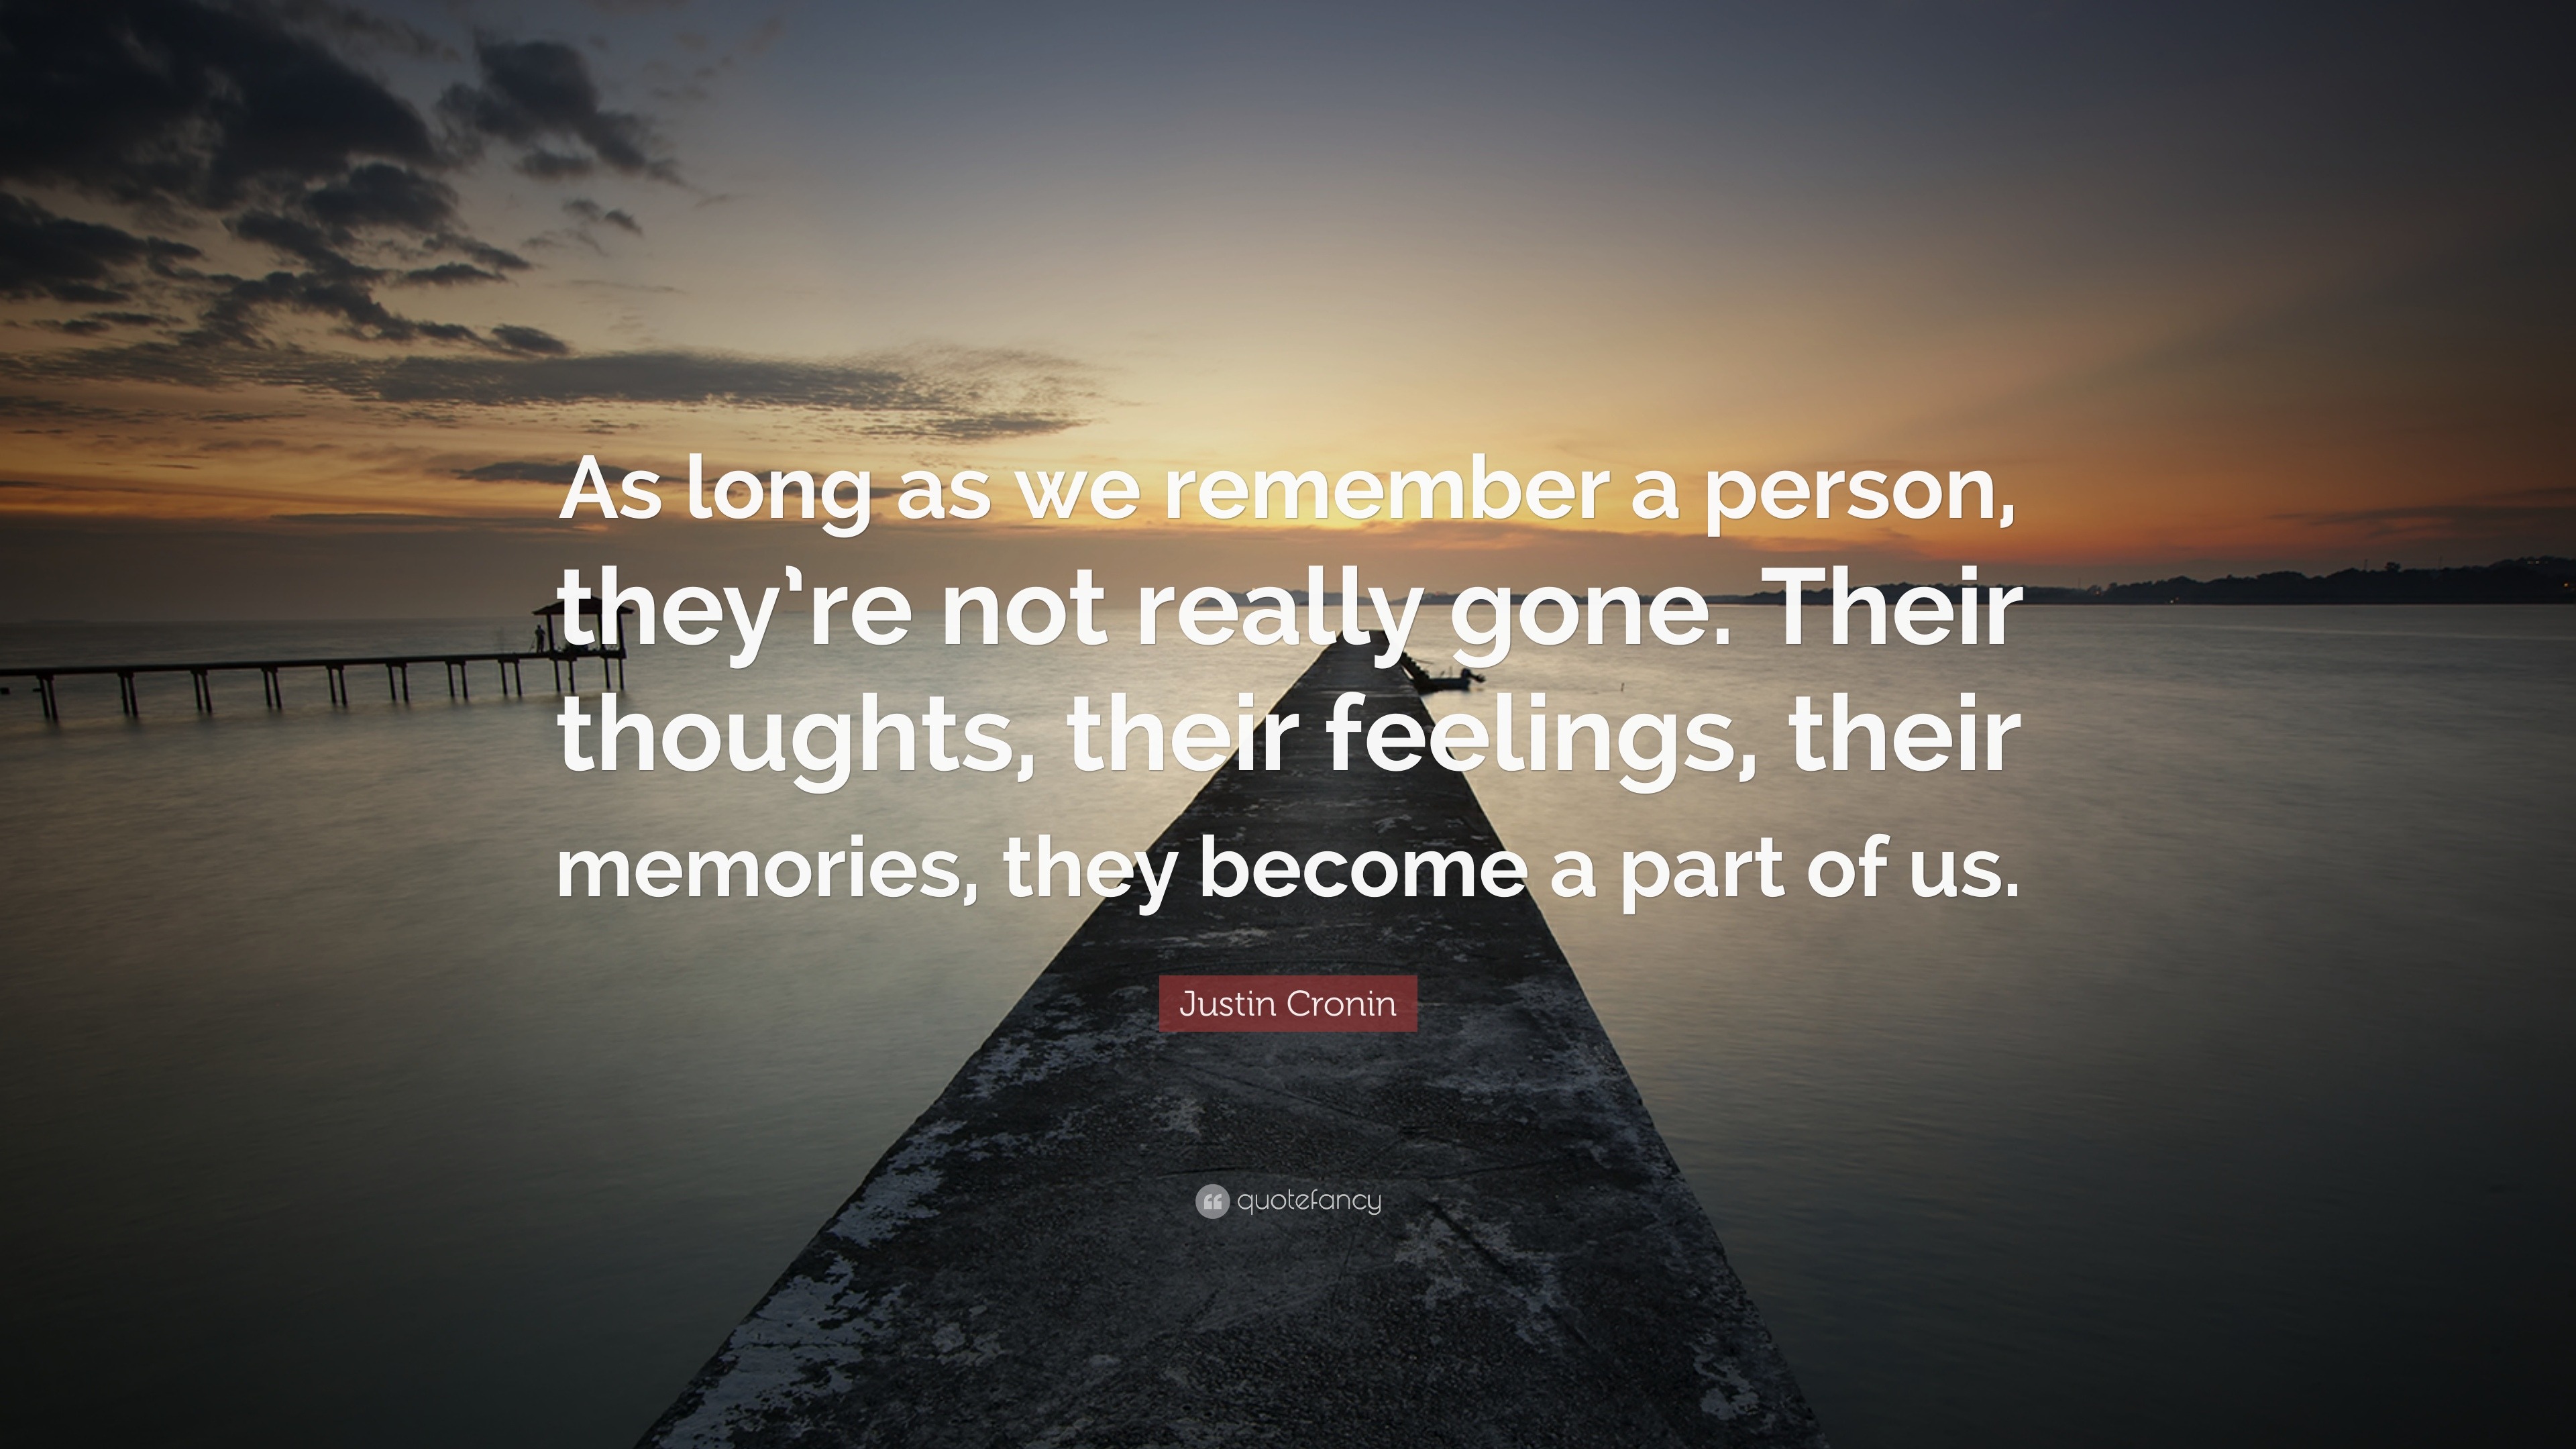 Justin Cronin Quote As Long As We Remember A Person They Re Not Really Gone Their Thoughts Their Feelings Their Memories They Become A